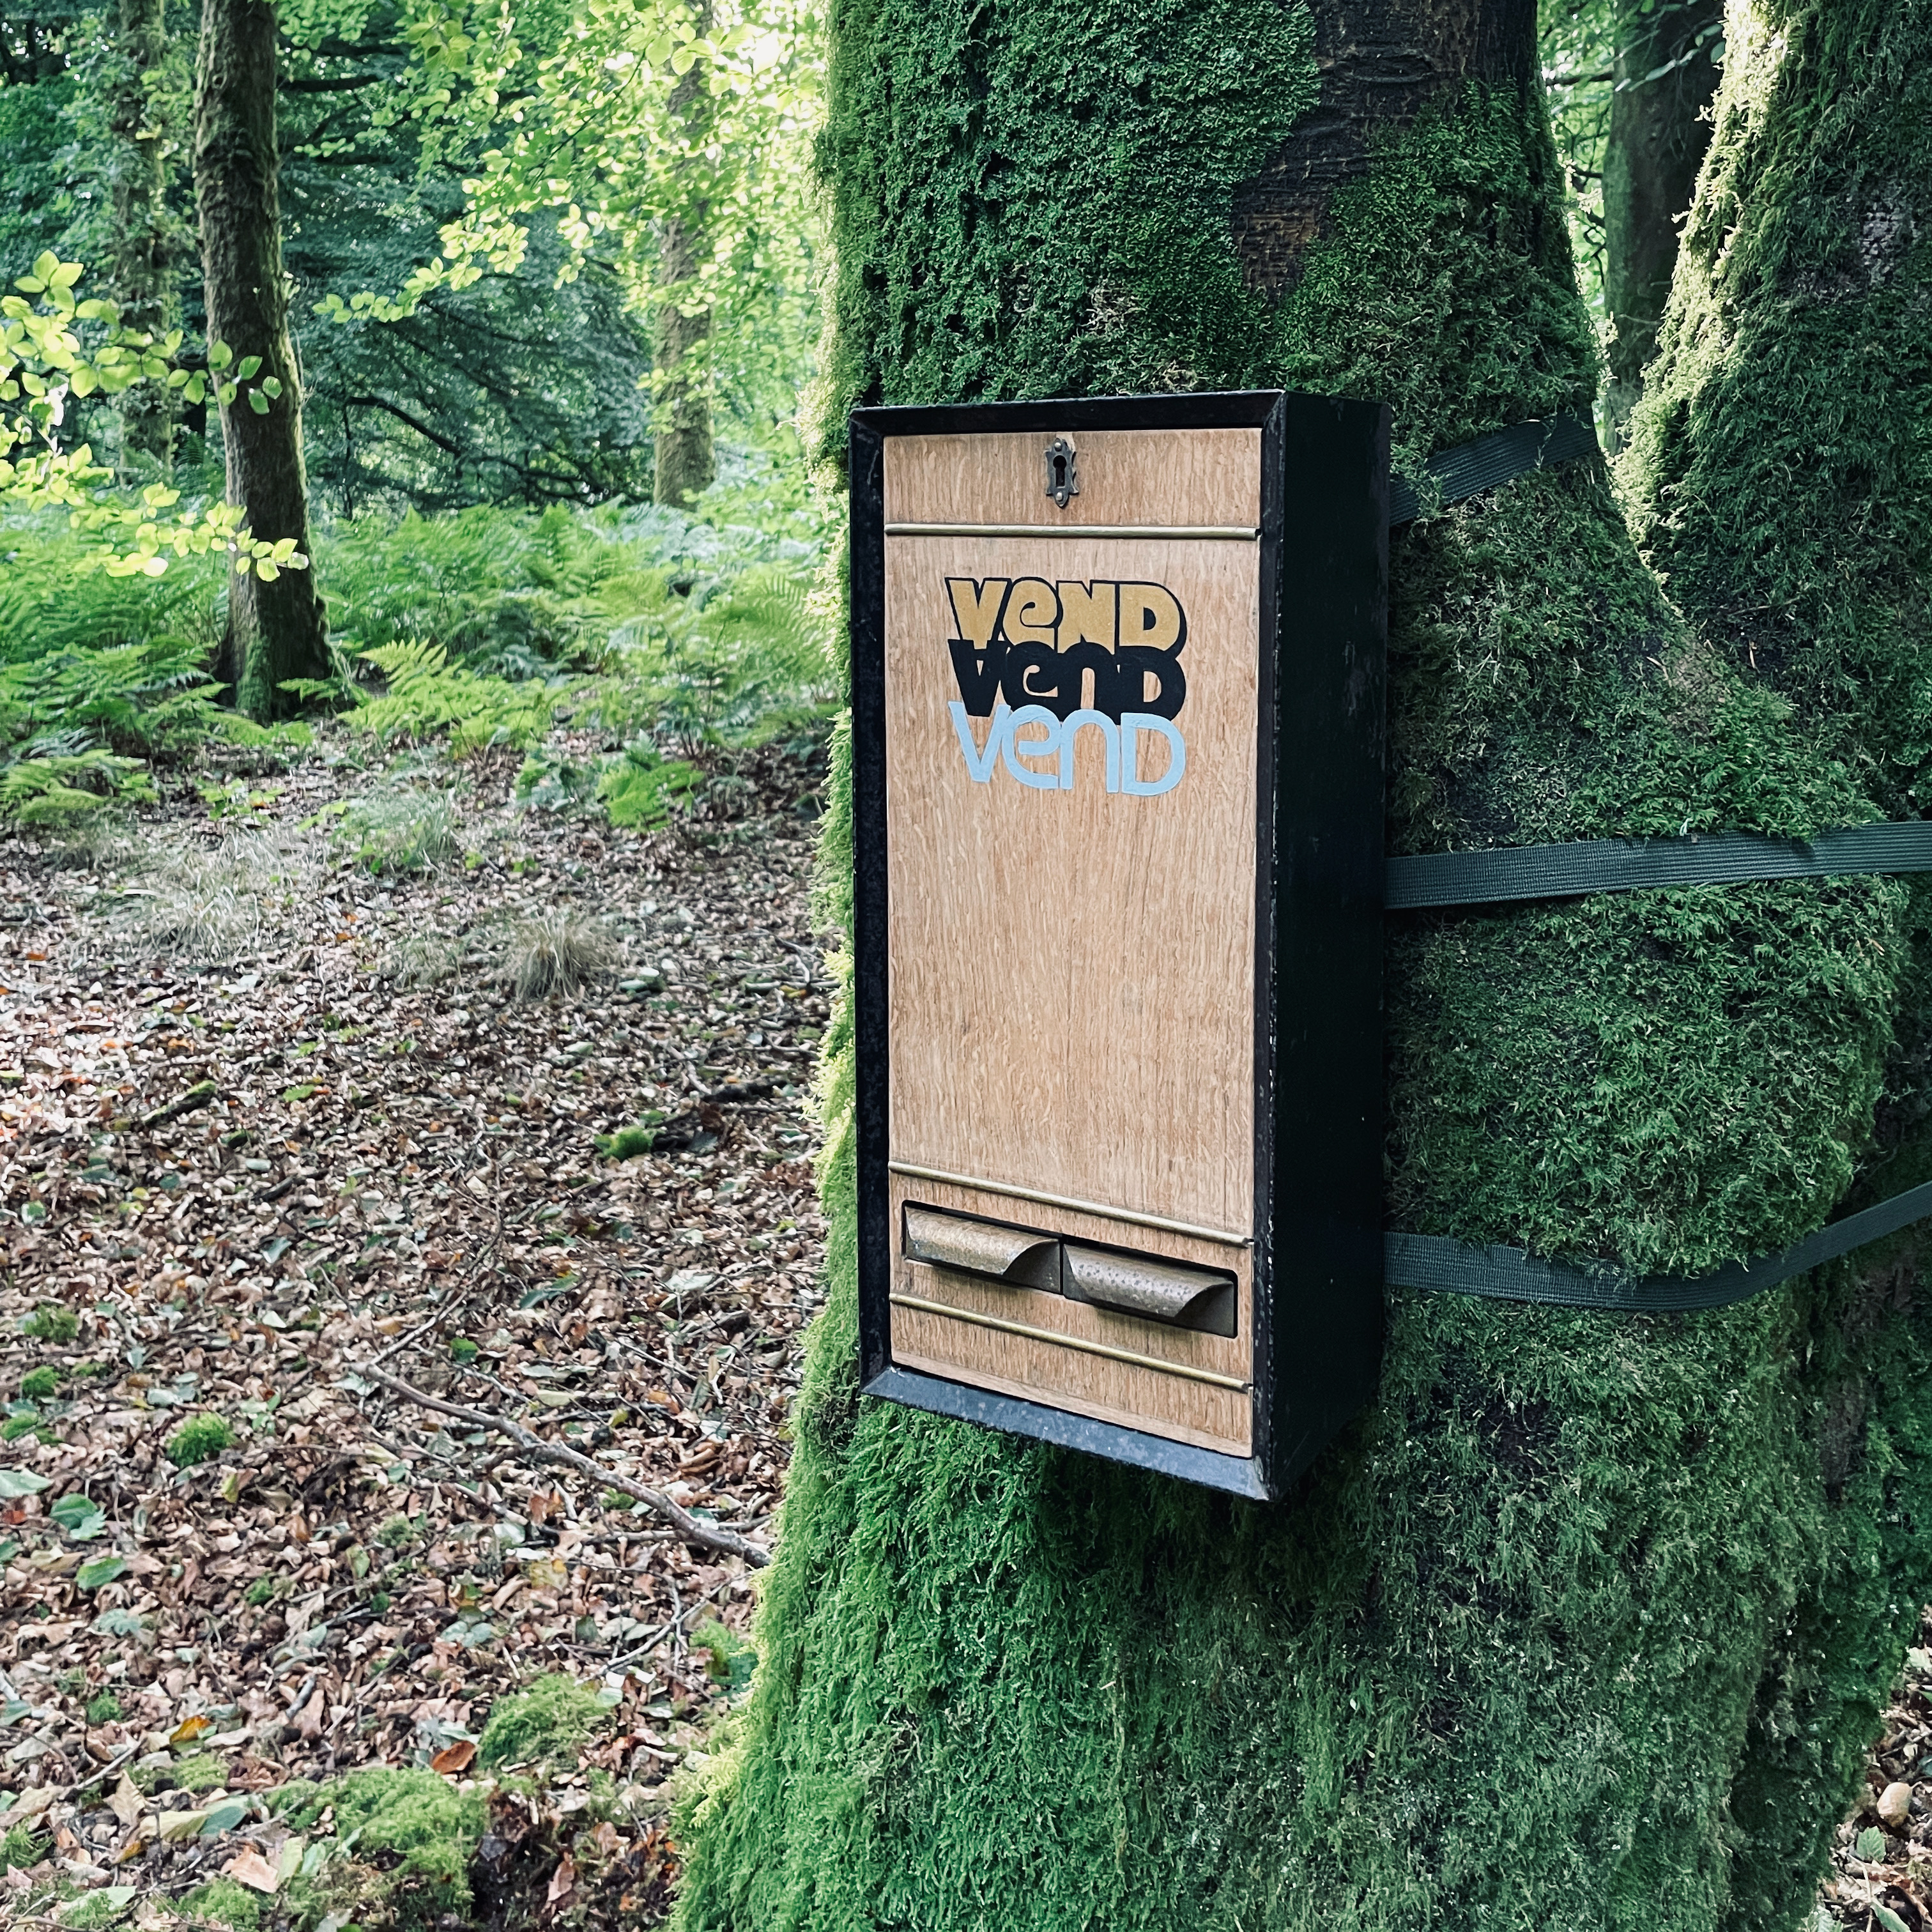 An old wooden cigarette vending machine attached to a mossy tree in a forest. It has the word 'vend' signwritten on the front three times. It has two small drawers in the bottom to dispense goods.